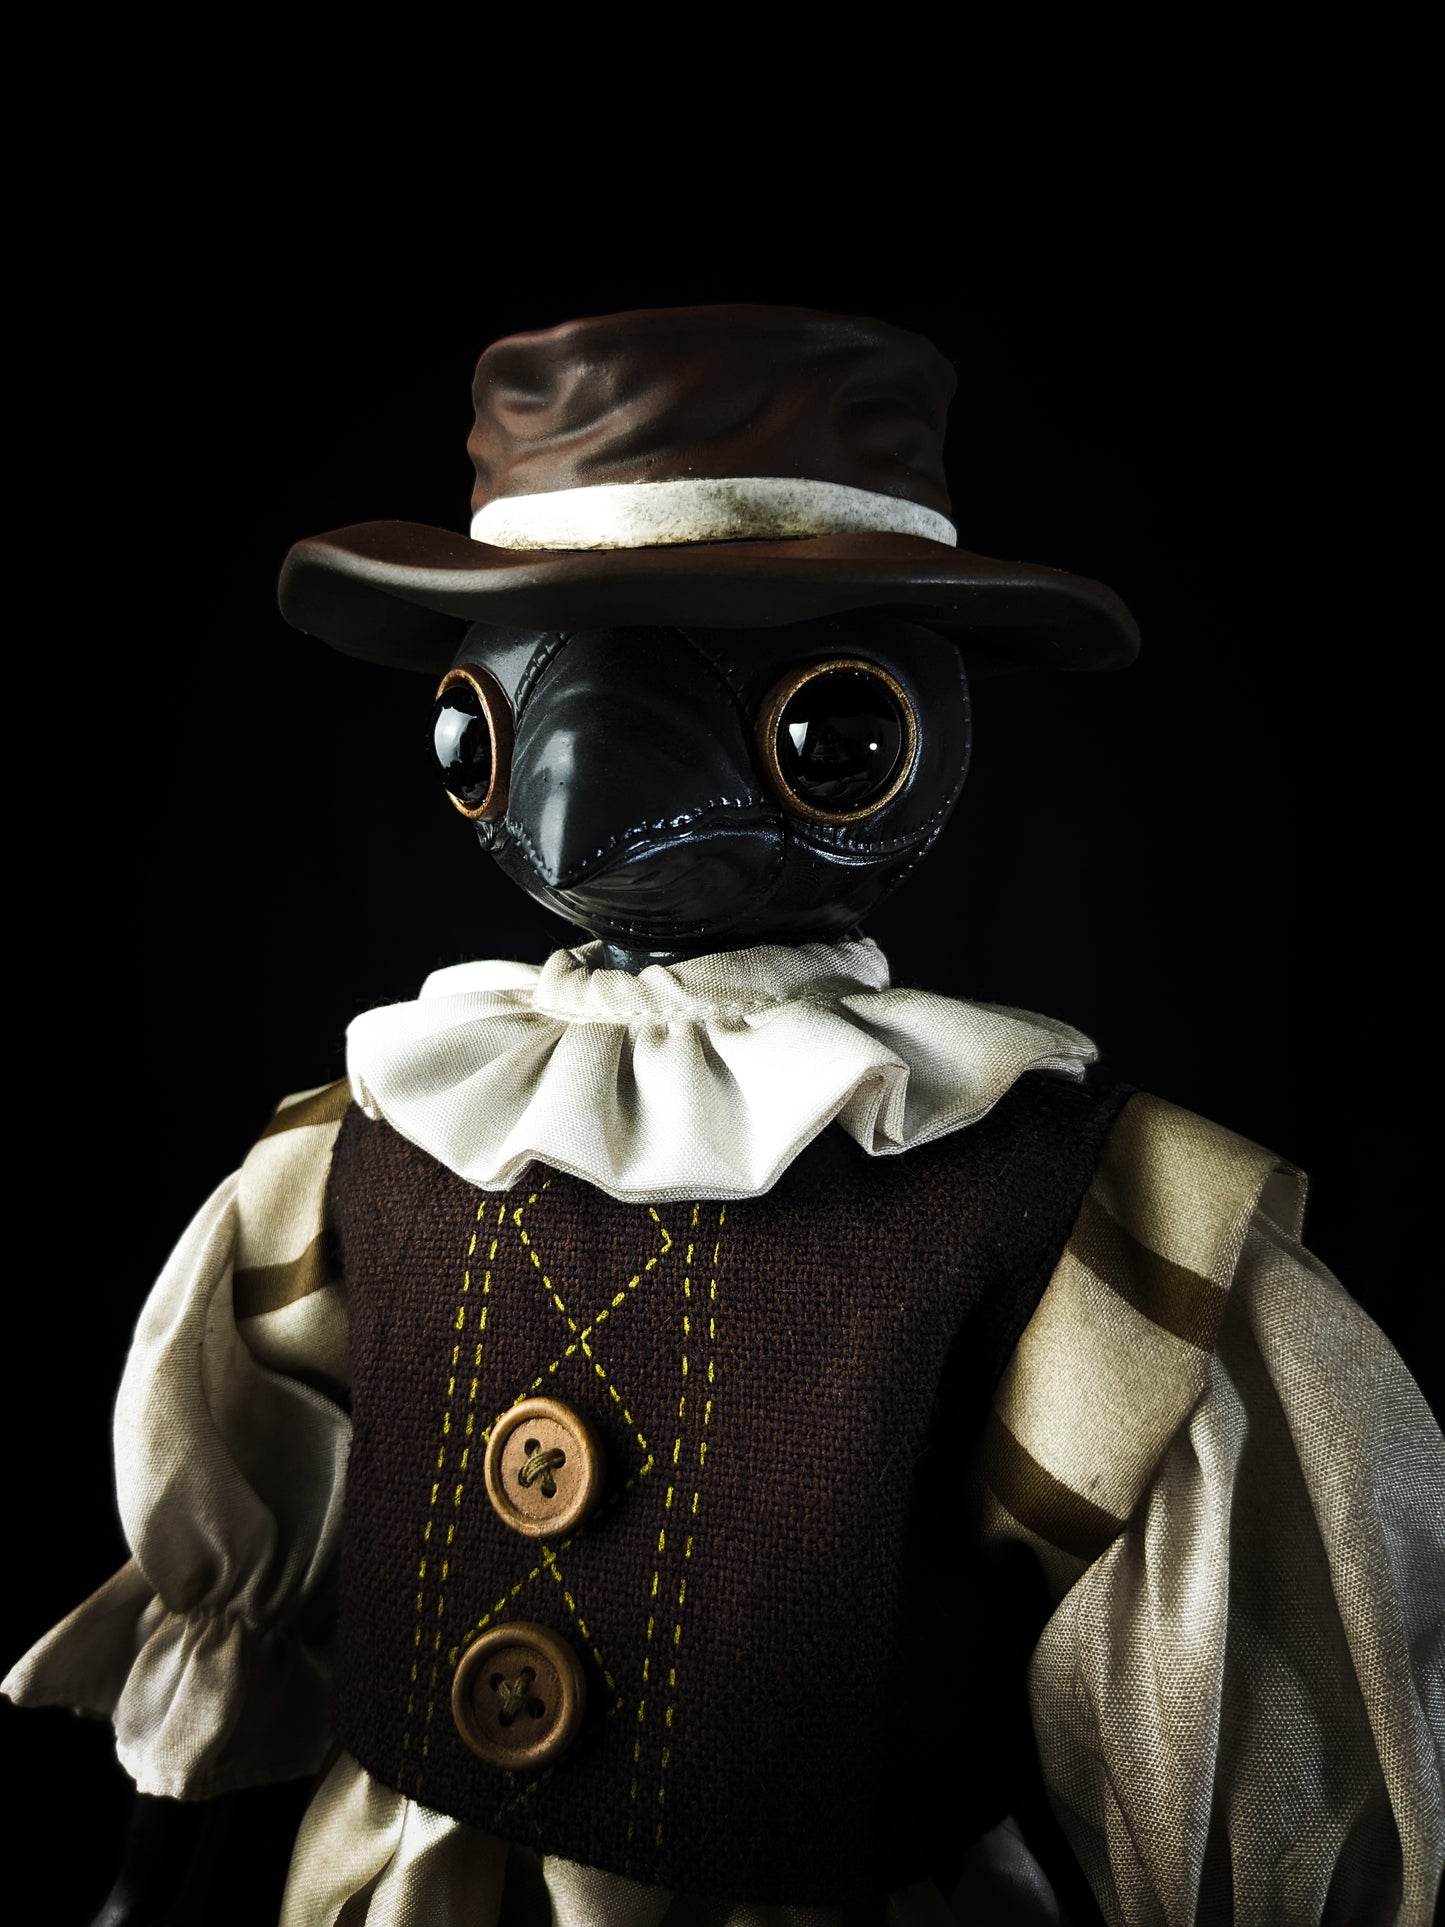 Depression Dolls: The Doctor - Handmade Plague Doctor Gothic Art Doll for Enigmatic Souls